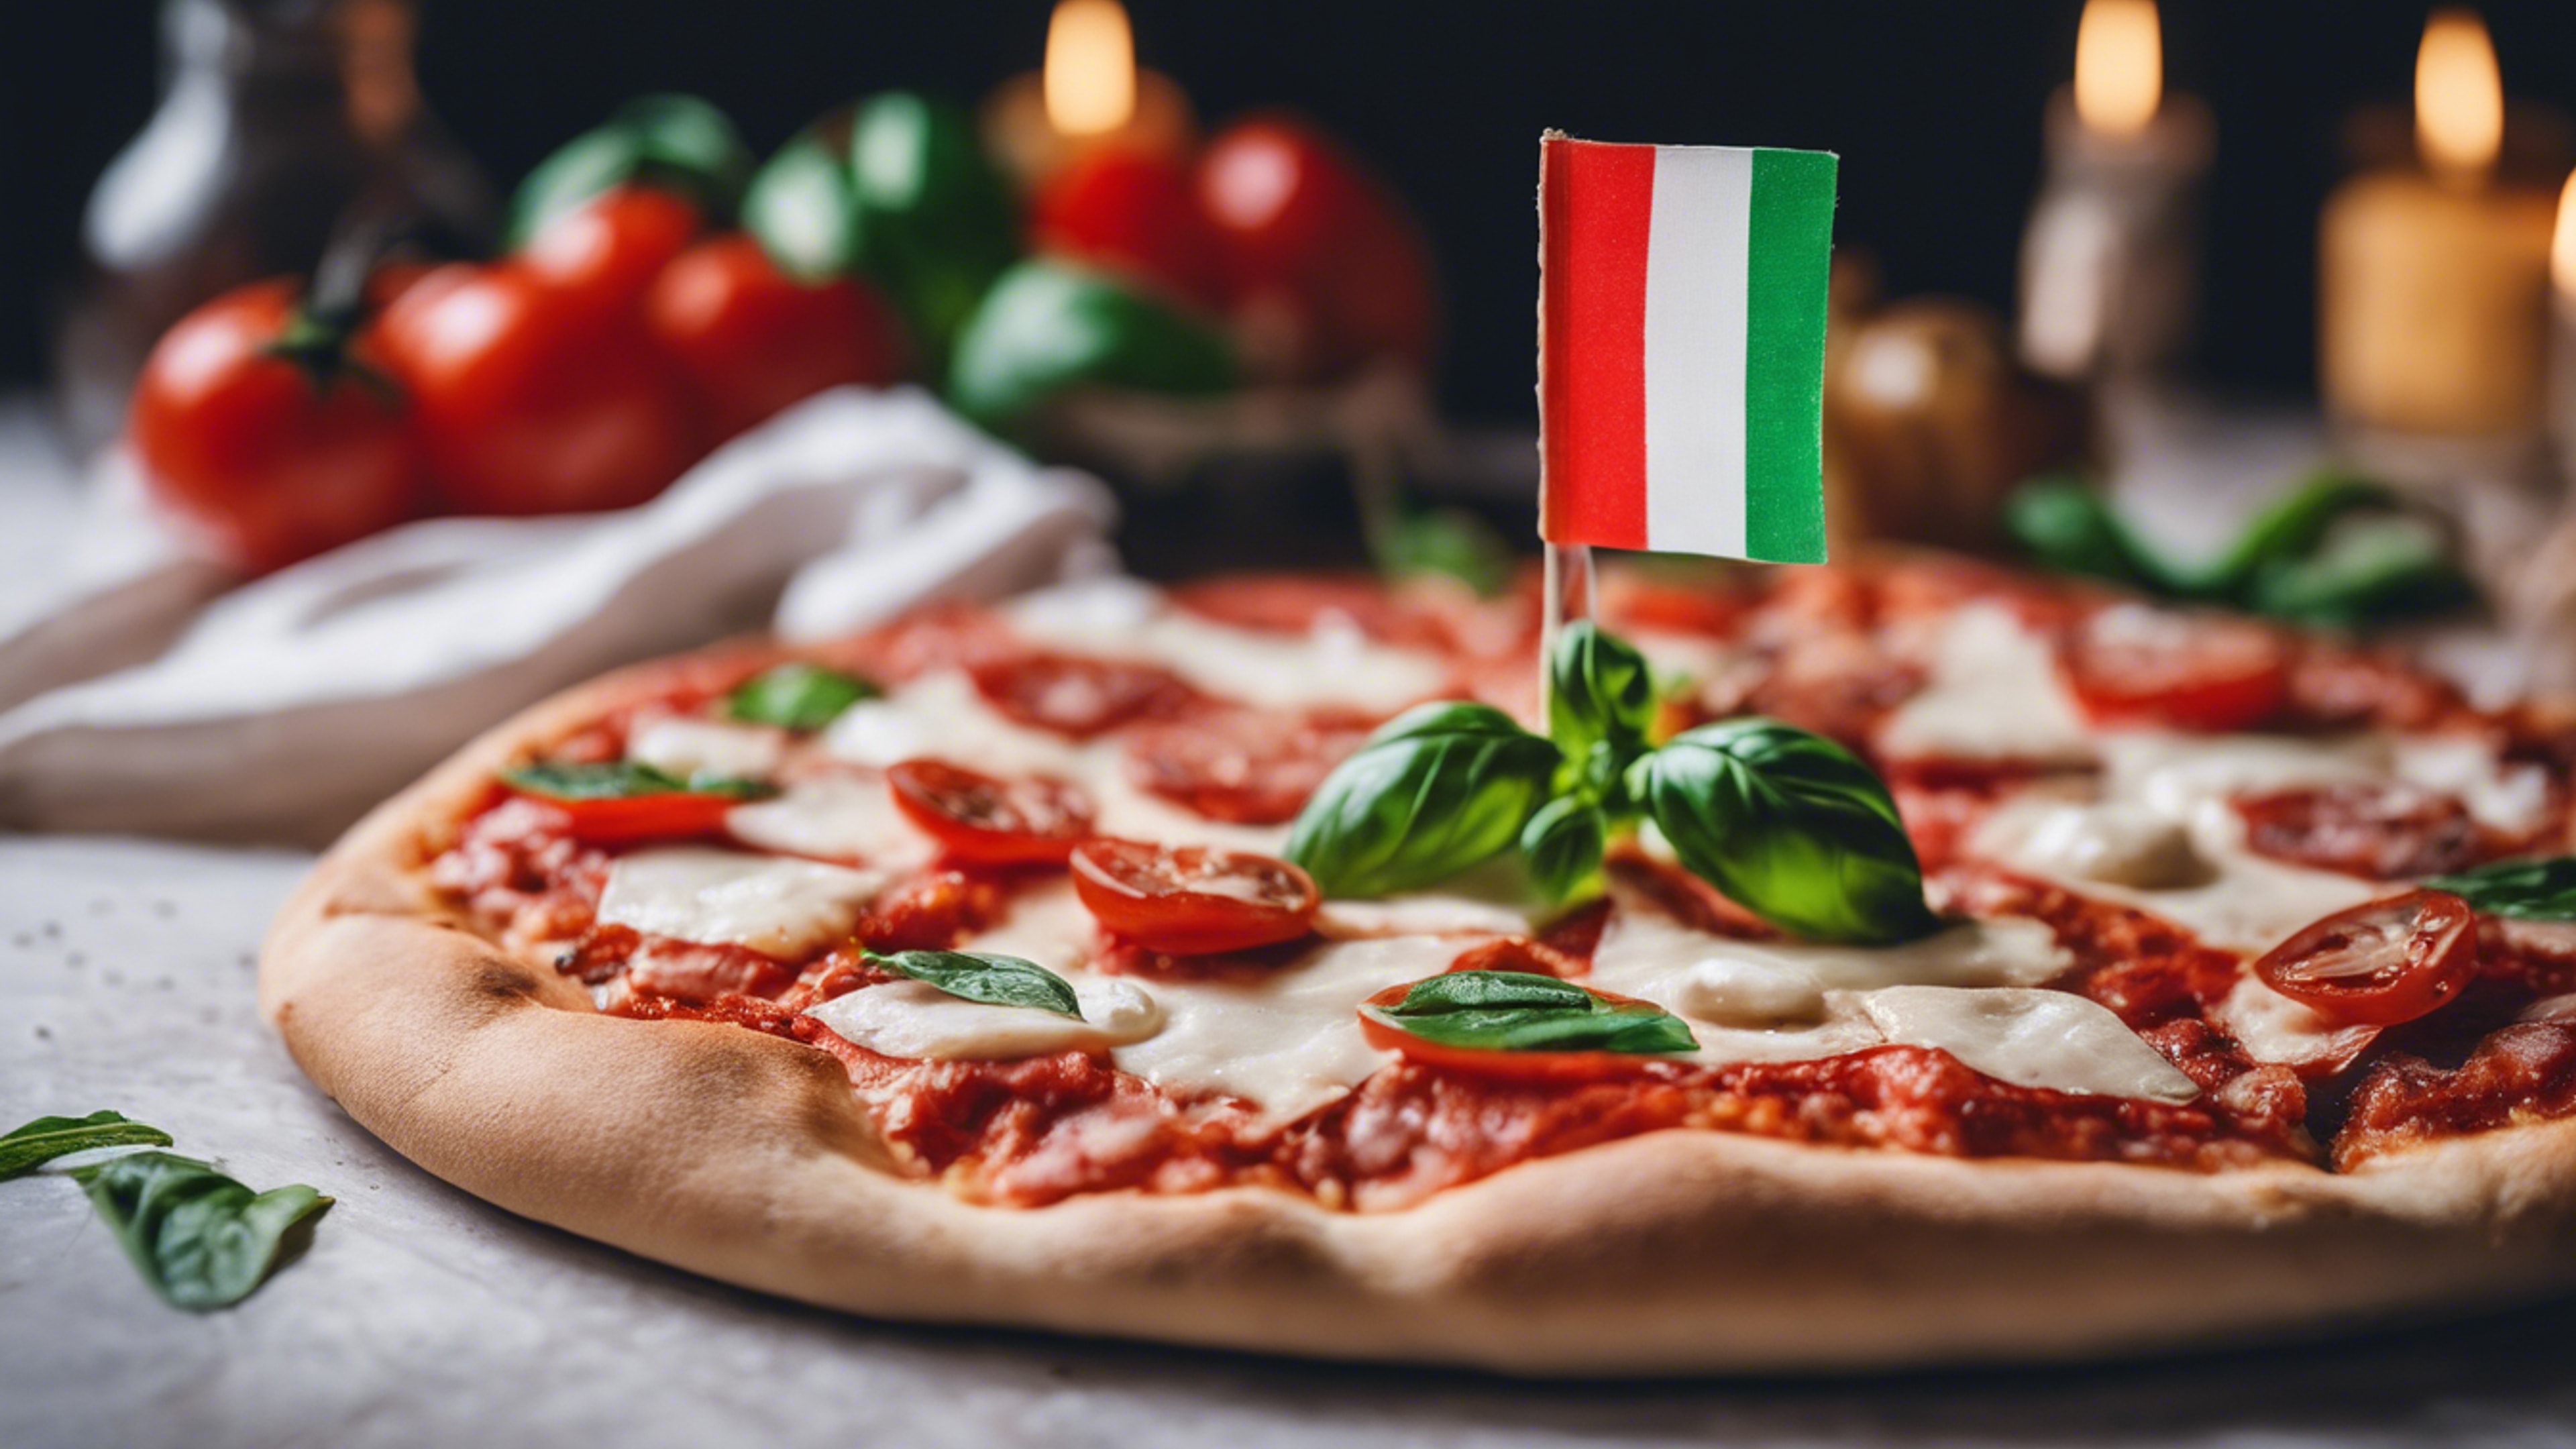 A delectable pizza margherita adorned with the vibrant colors of the Italian flag – green basil, white mozzarella, and red tomatoes. ផ្ទាំង​រូបភាព[8d7c128777db467783aa]